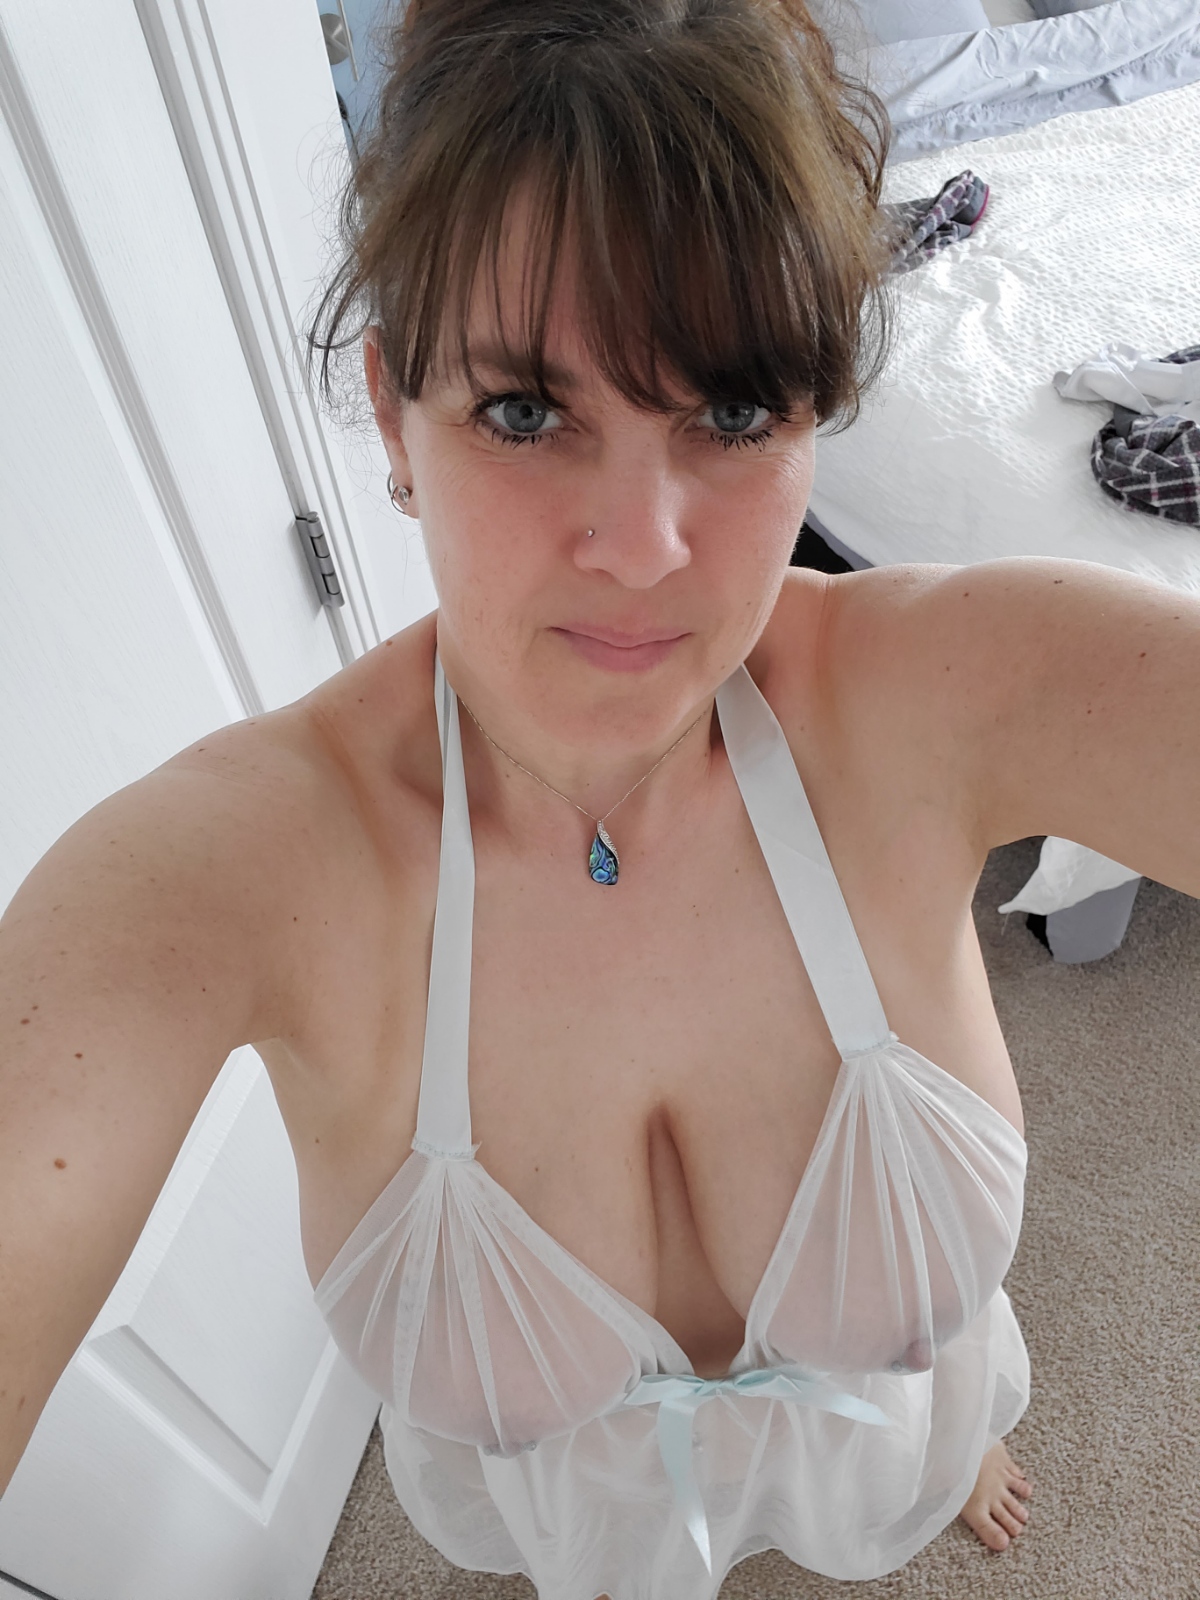 My Mature Milf Wife for your enjoyment